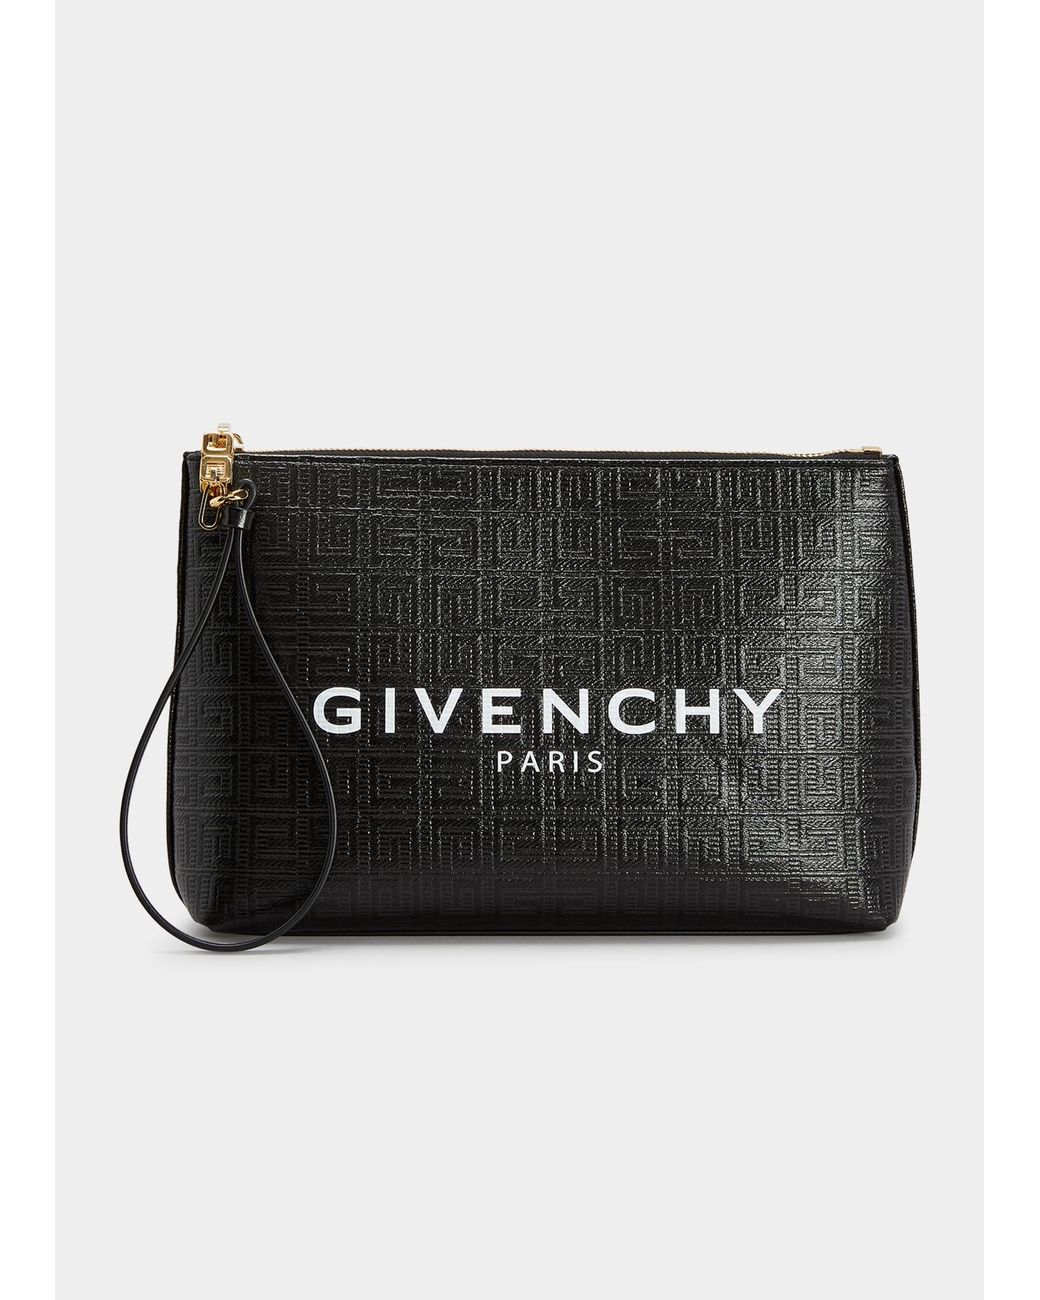 Givenchy Large Monogram-embossed Pouch Clutch Bag in Black | Lyst